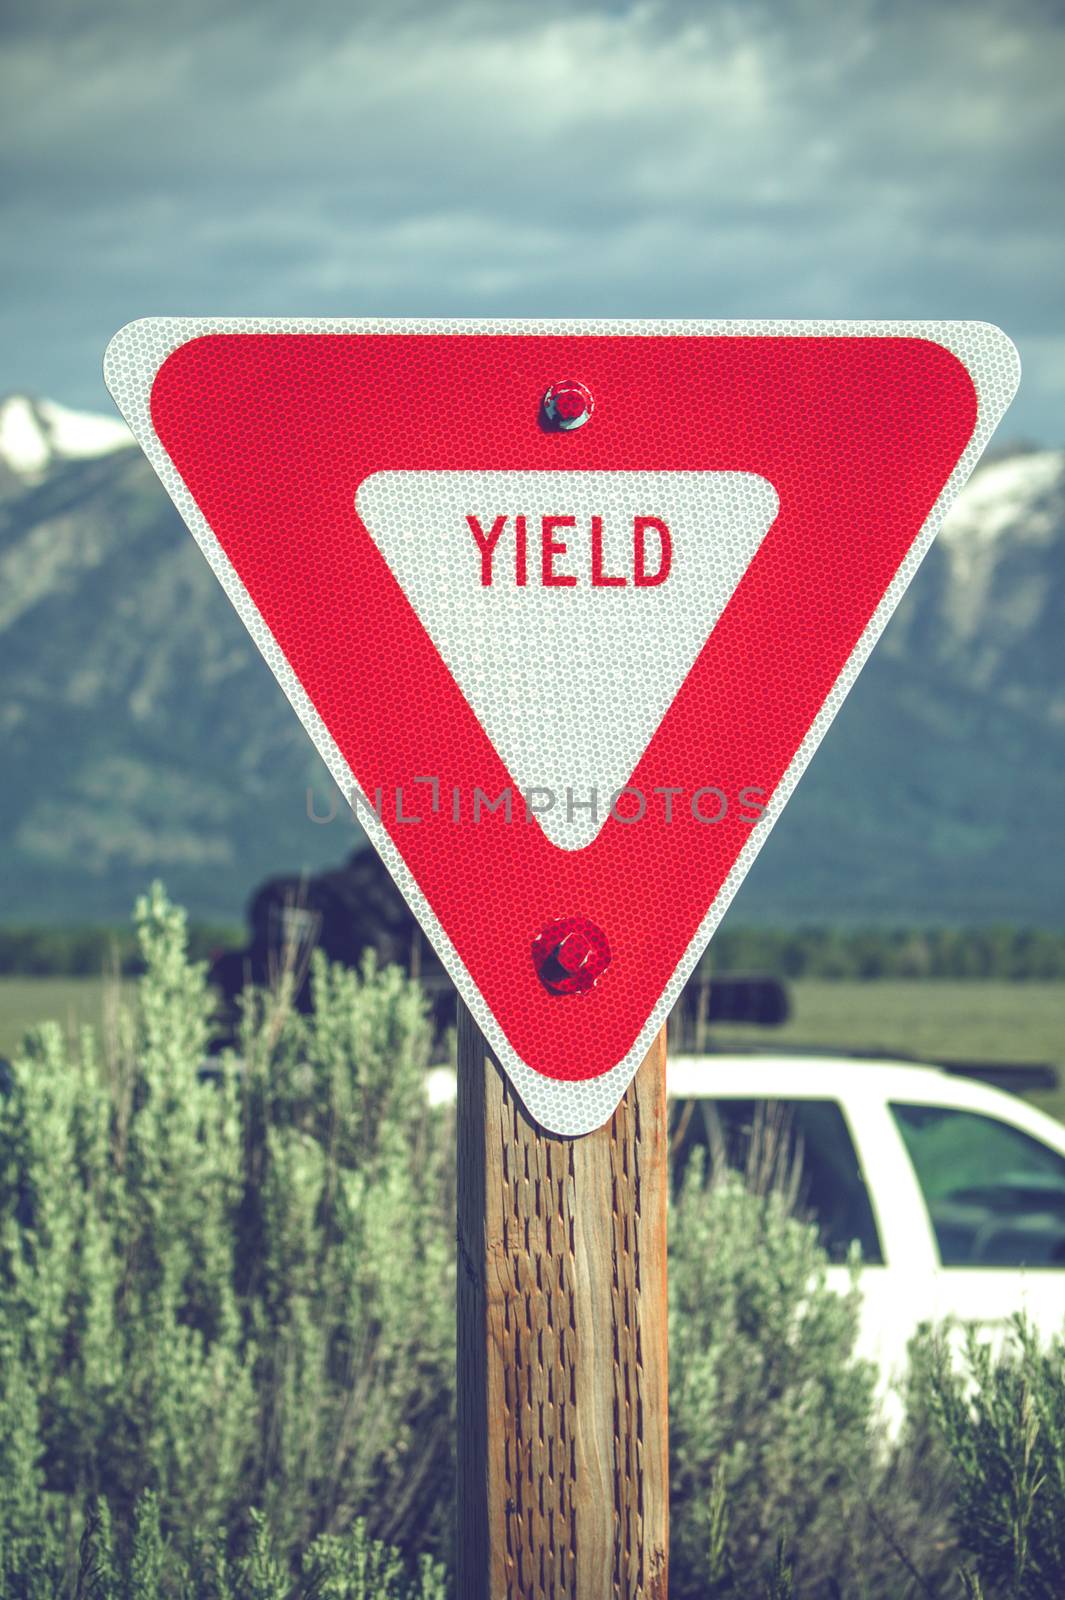 Large red yield sign in a countryside by Sportactive